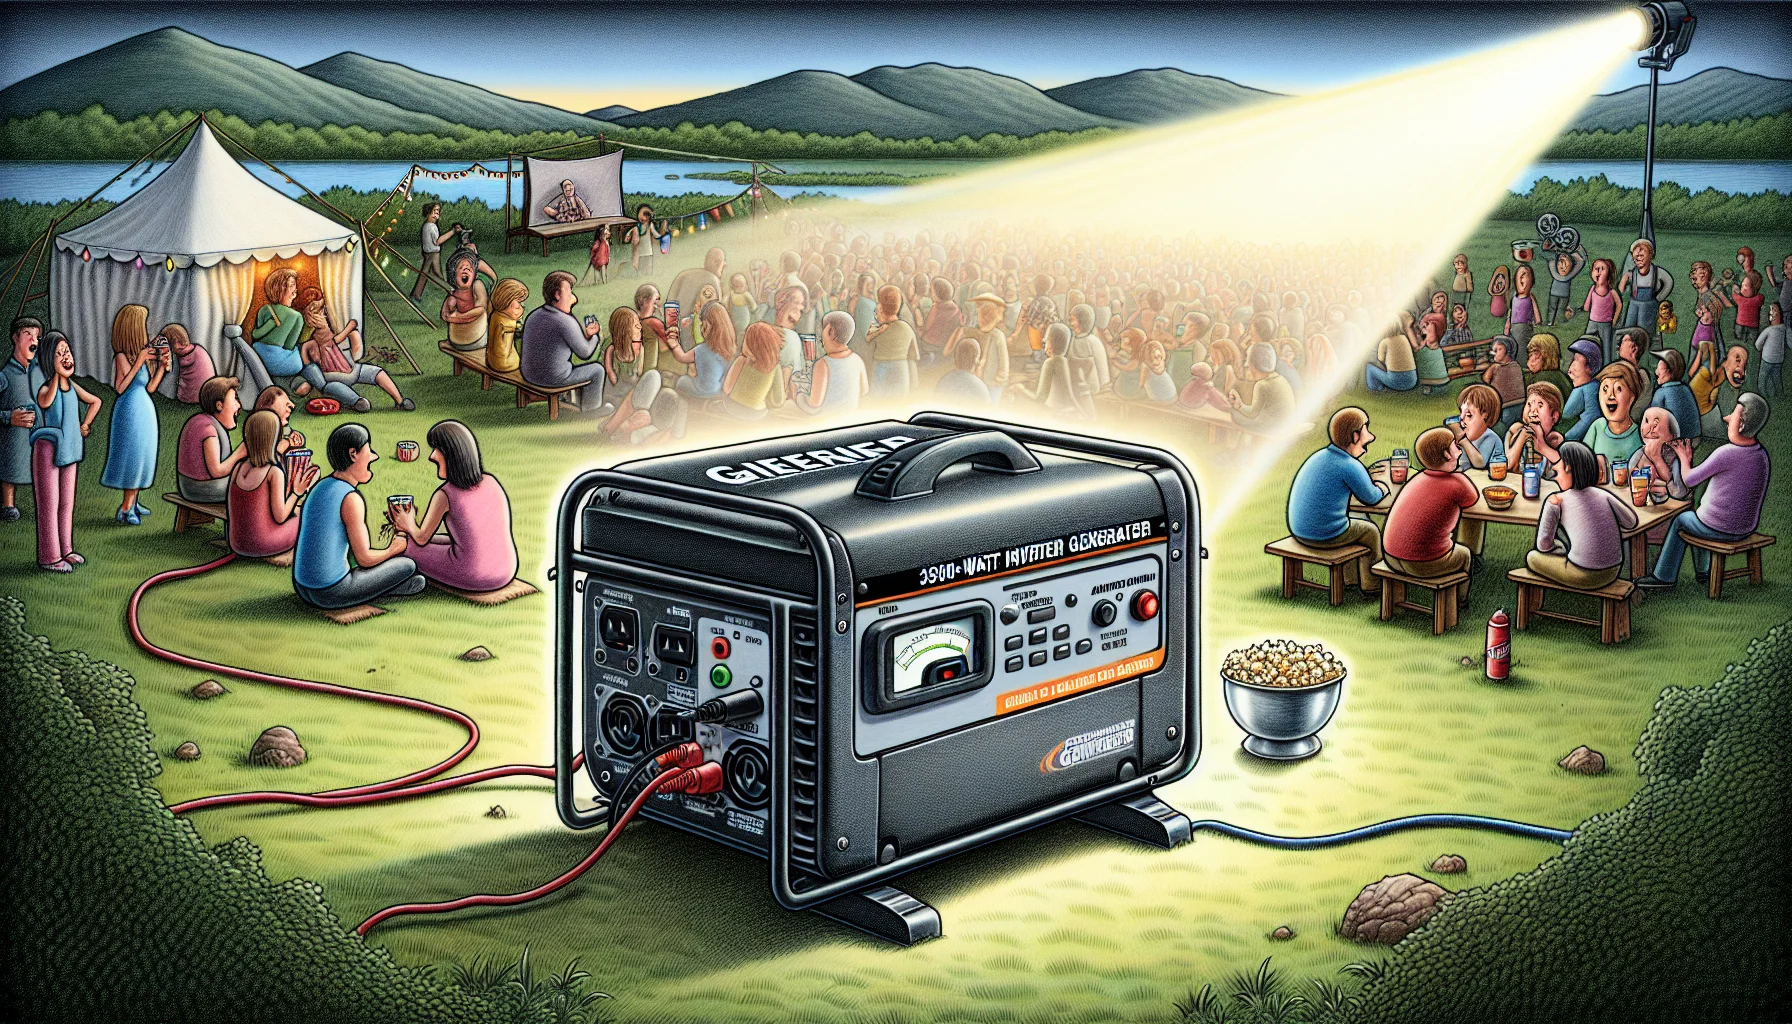 Illustrate a humorous scene of a 3500-Watt Inverter Generator as the life of the party. This generator, carefully detailed with control panel and outlets, is set up in a field with natural landscapes on one side and an outdoor party on the other side. People from diverse descents and genders are gathered around it, fascinated and amused. They're using the generator to run various amusing appliances such as disco balls, a popcorn machine, and an outdoor cinema showing a slapstick comedy. The light from the generator creates a spotlight, adding drama to the scenario, hence highlighting the concept of enticing people to generate their own electricity.